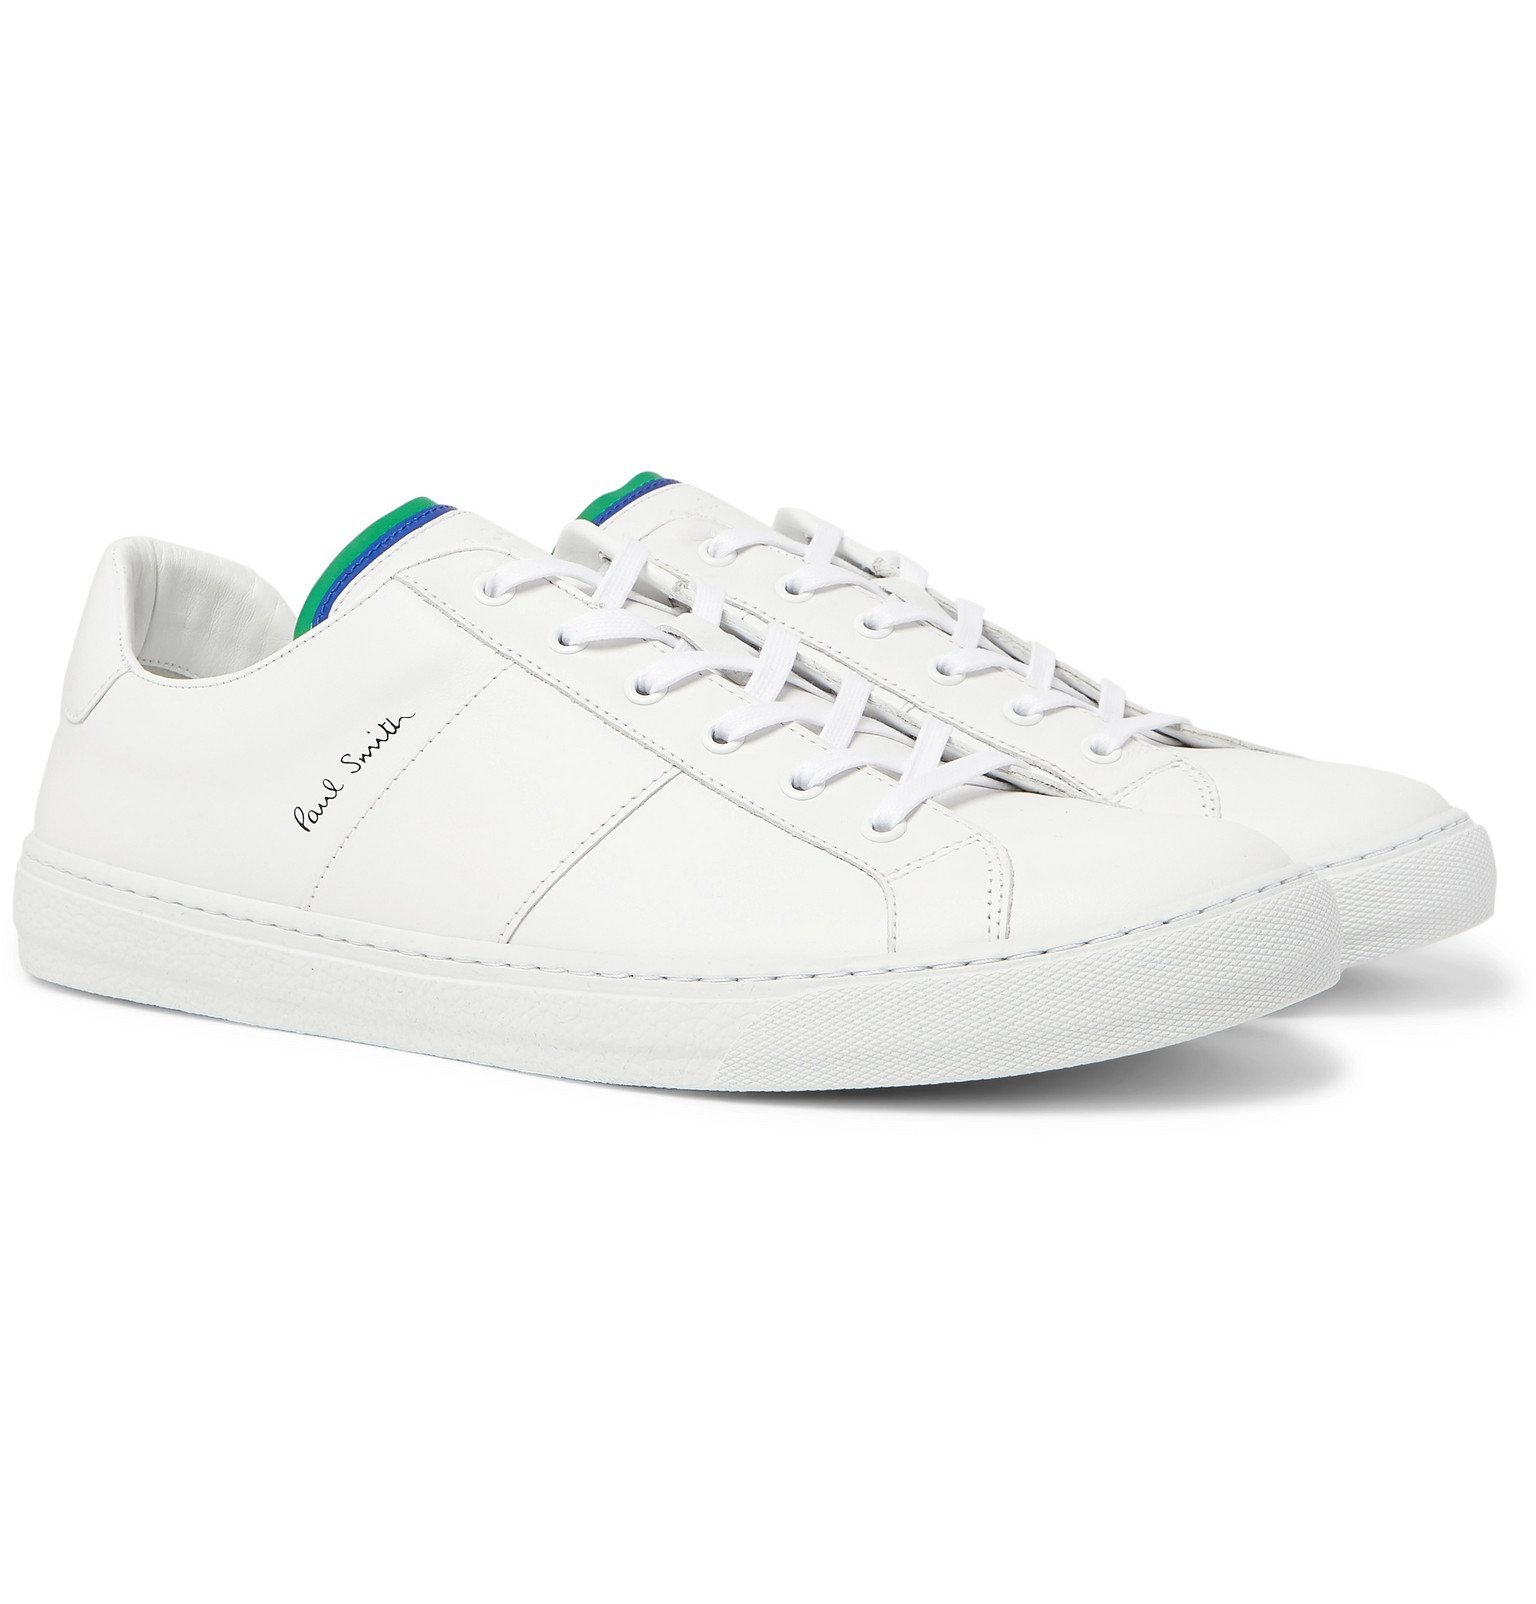 paul smith tennis shoes